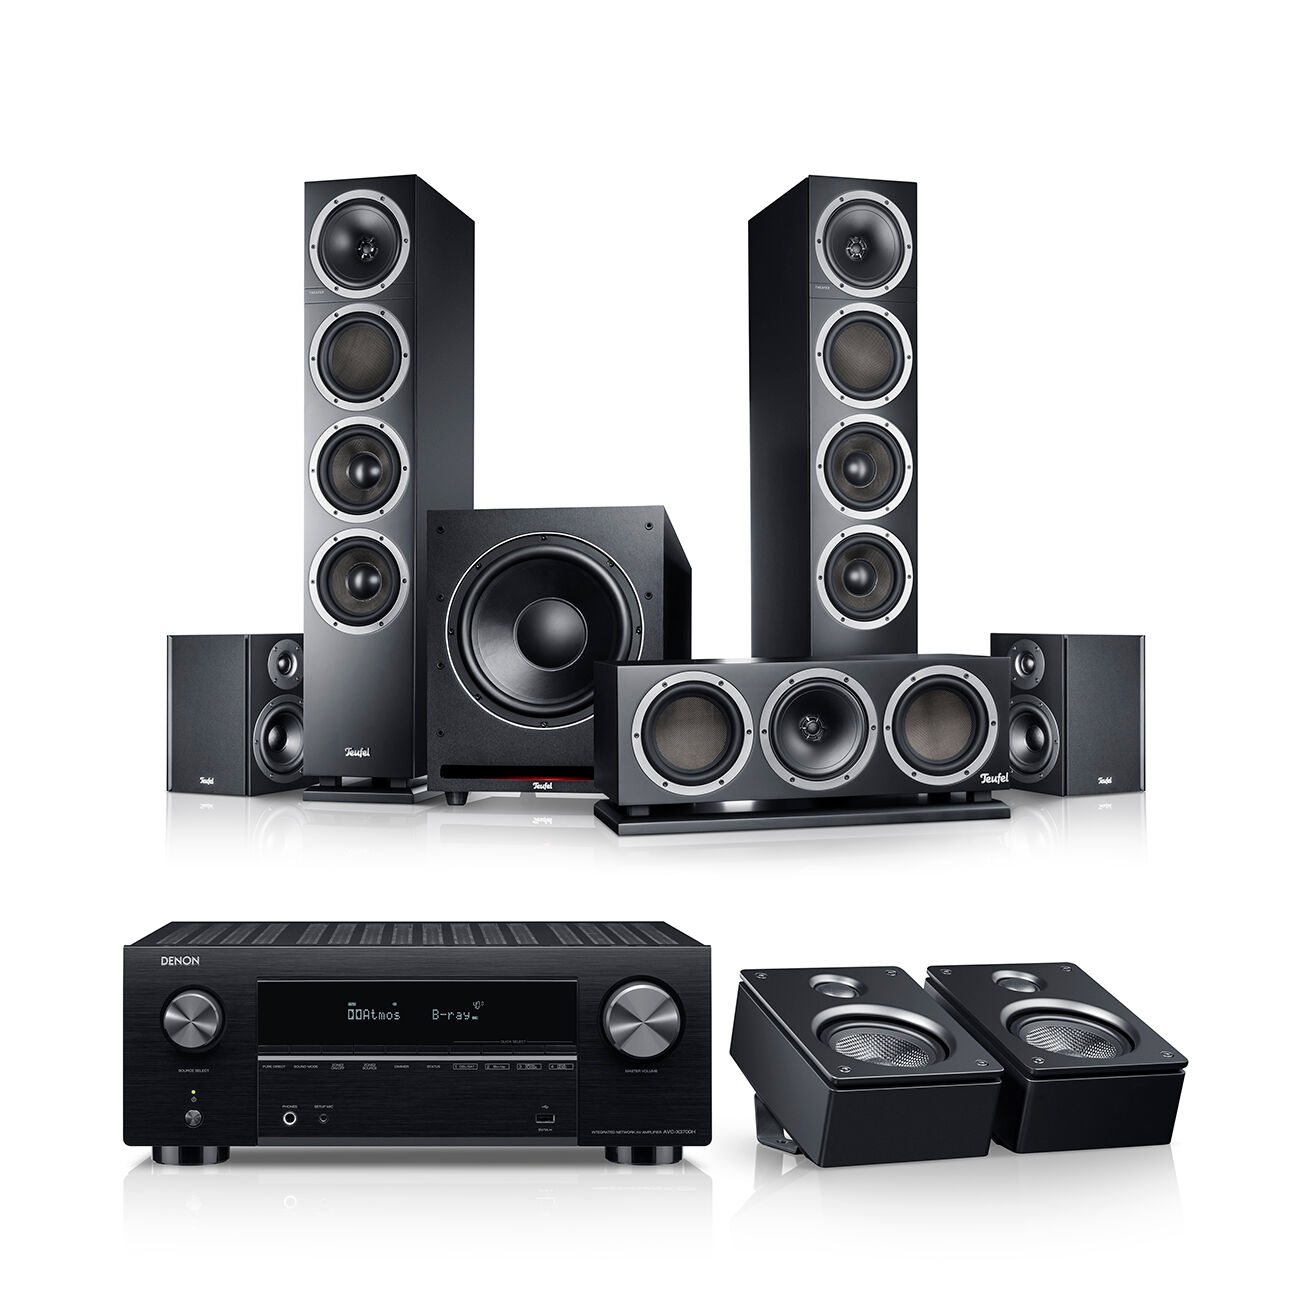 Teufel Theater 500 Surround AVR fÃ¼r Dolby Atmos